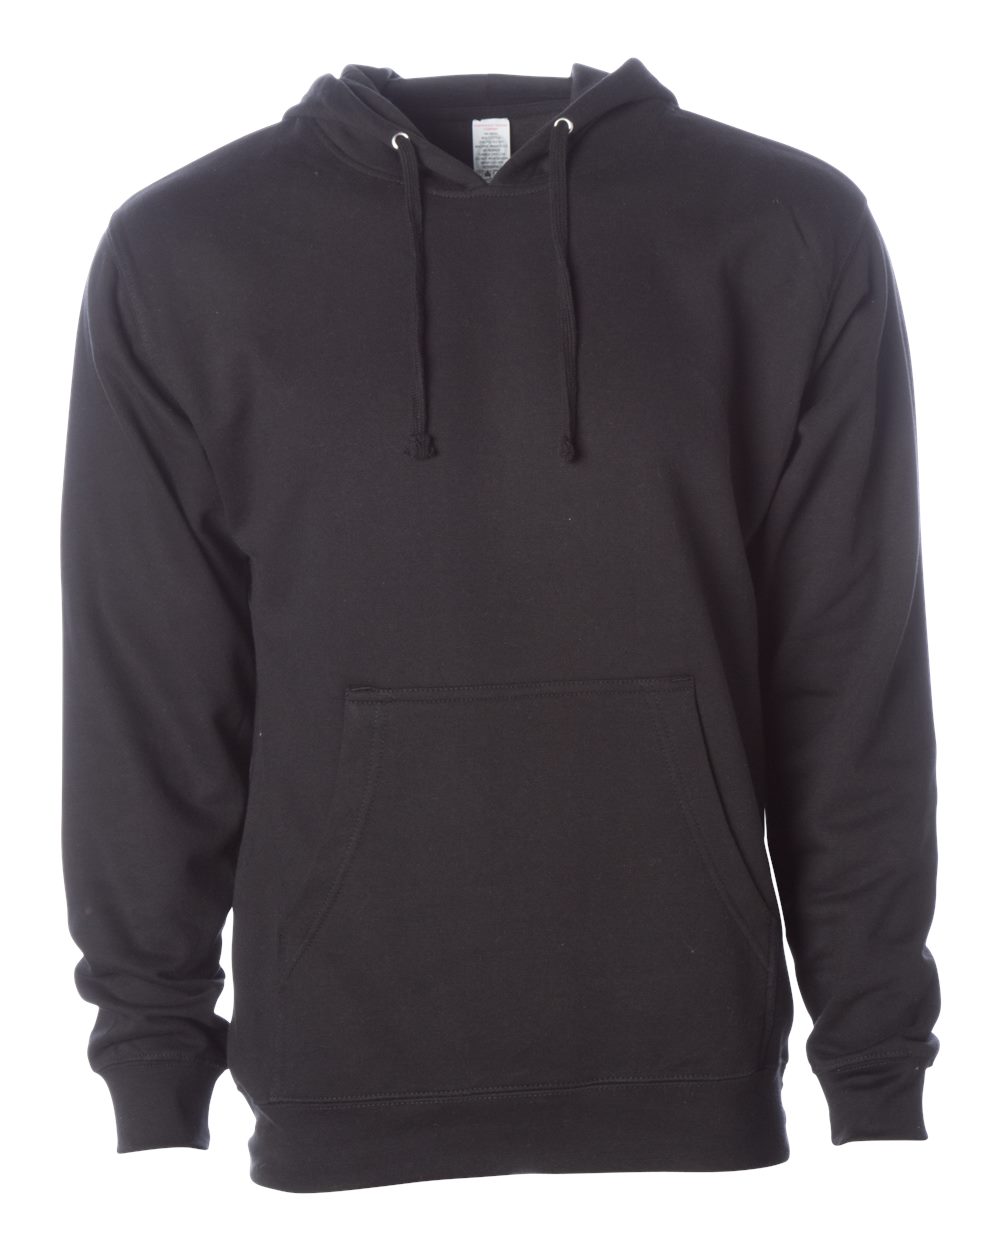 Independent Trading Co. Midweight Sweatshirt (SS4500)